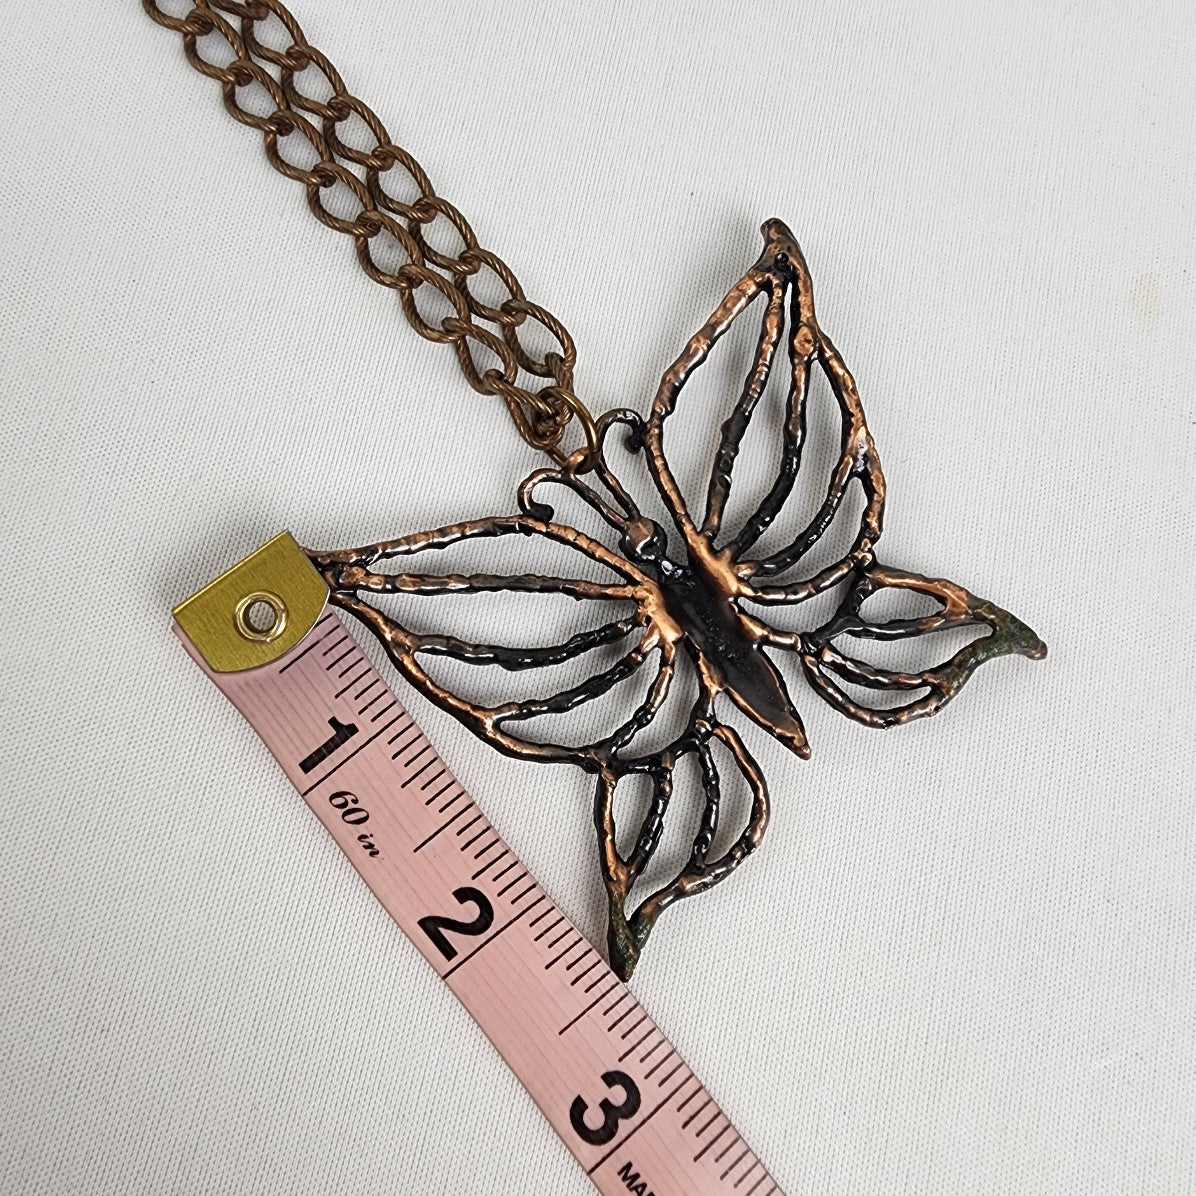 Vintage Copper Butterfly Pendant Chain Statement Necklace